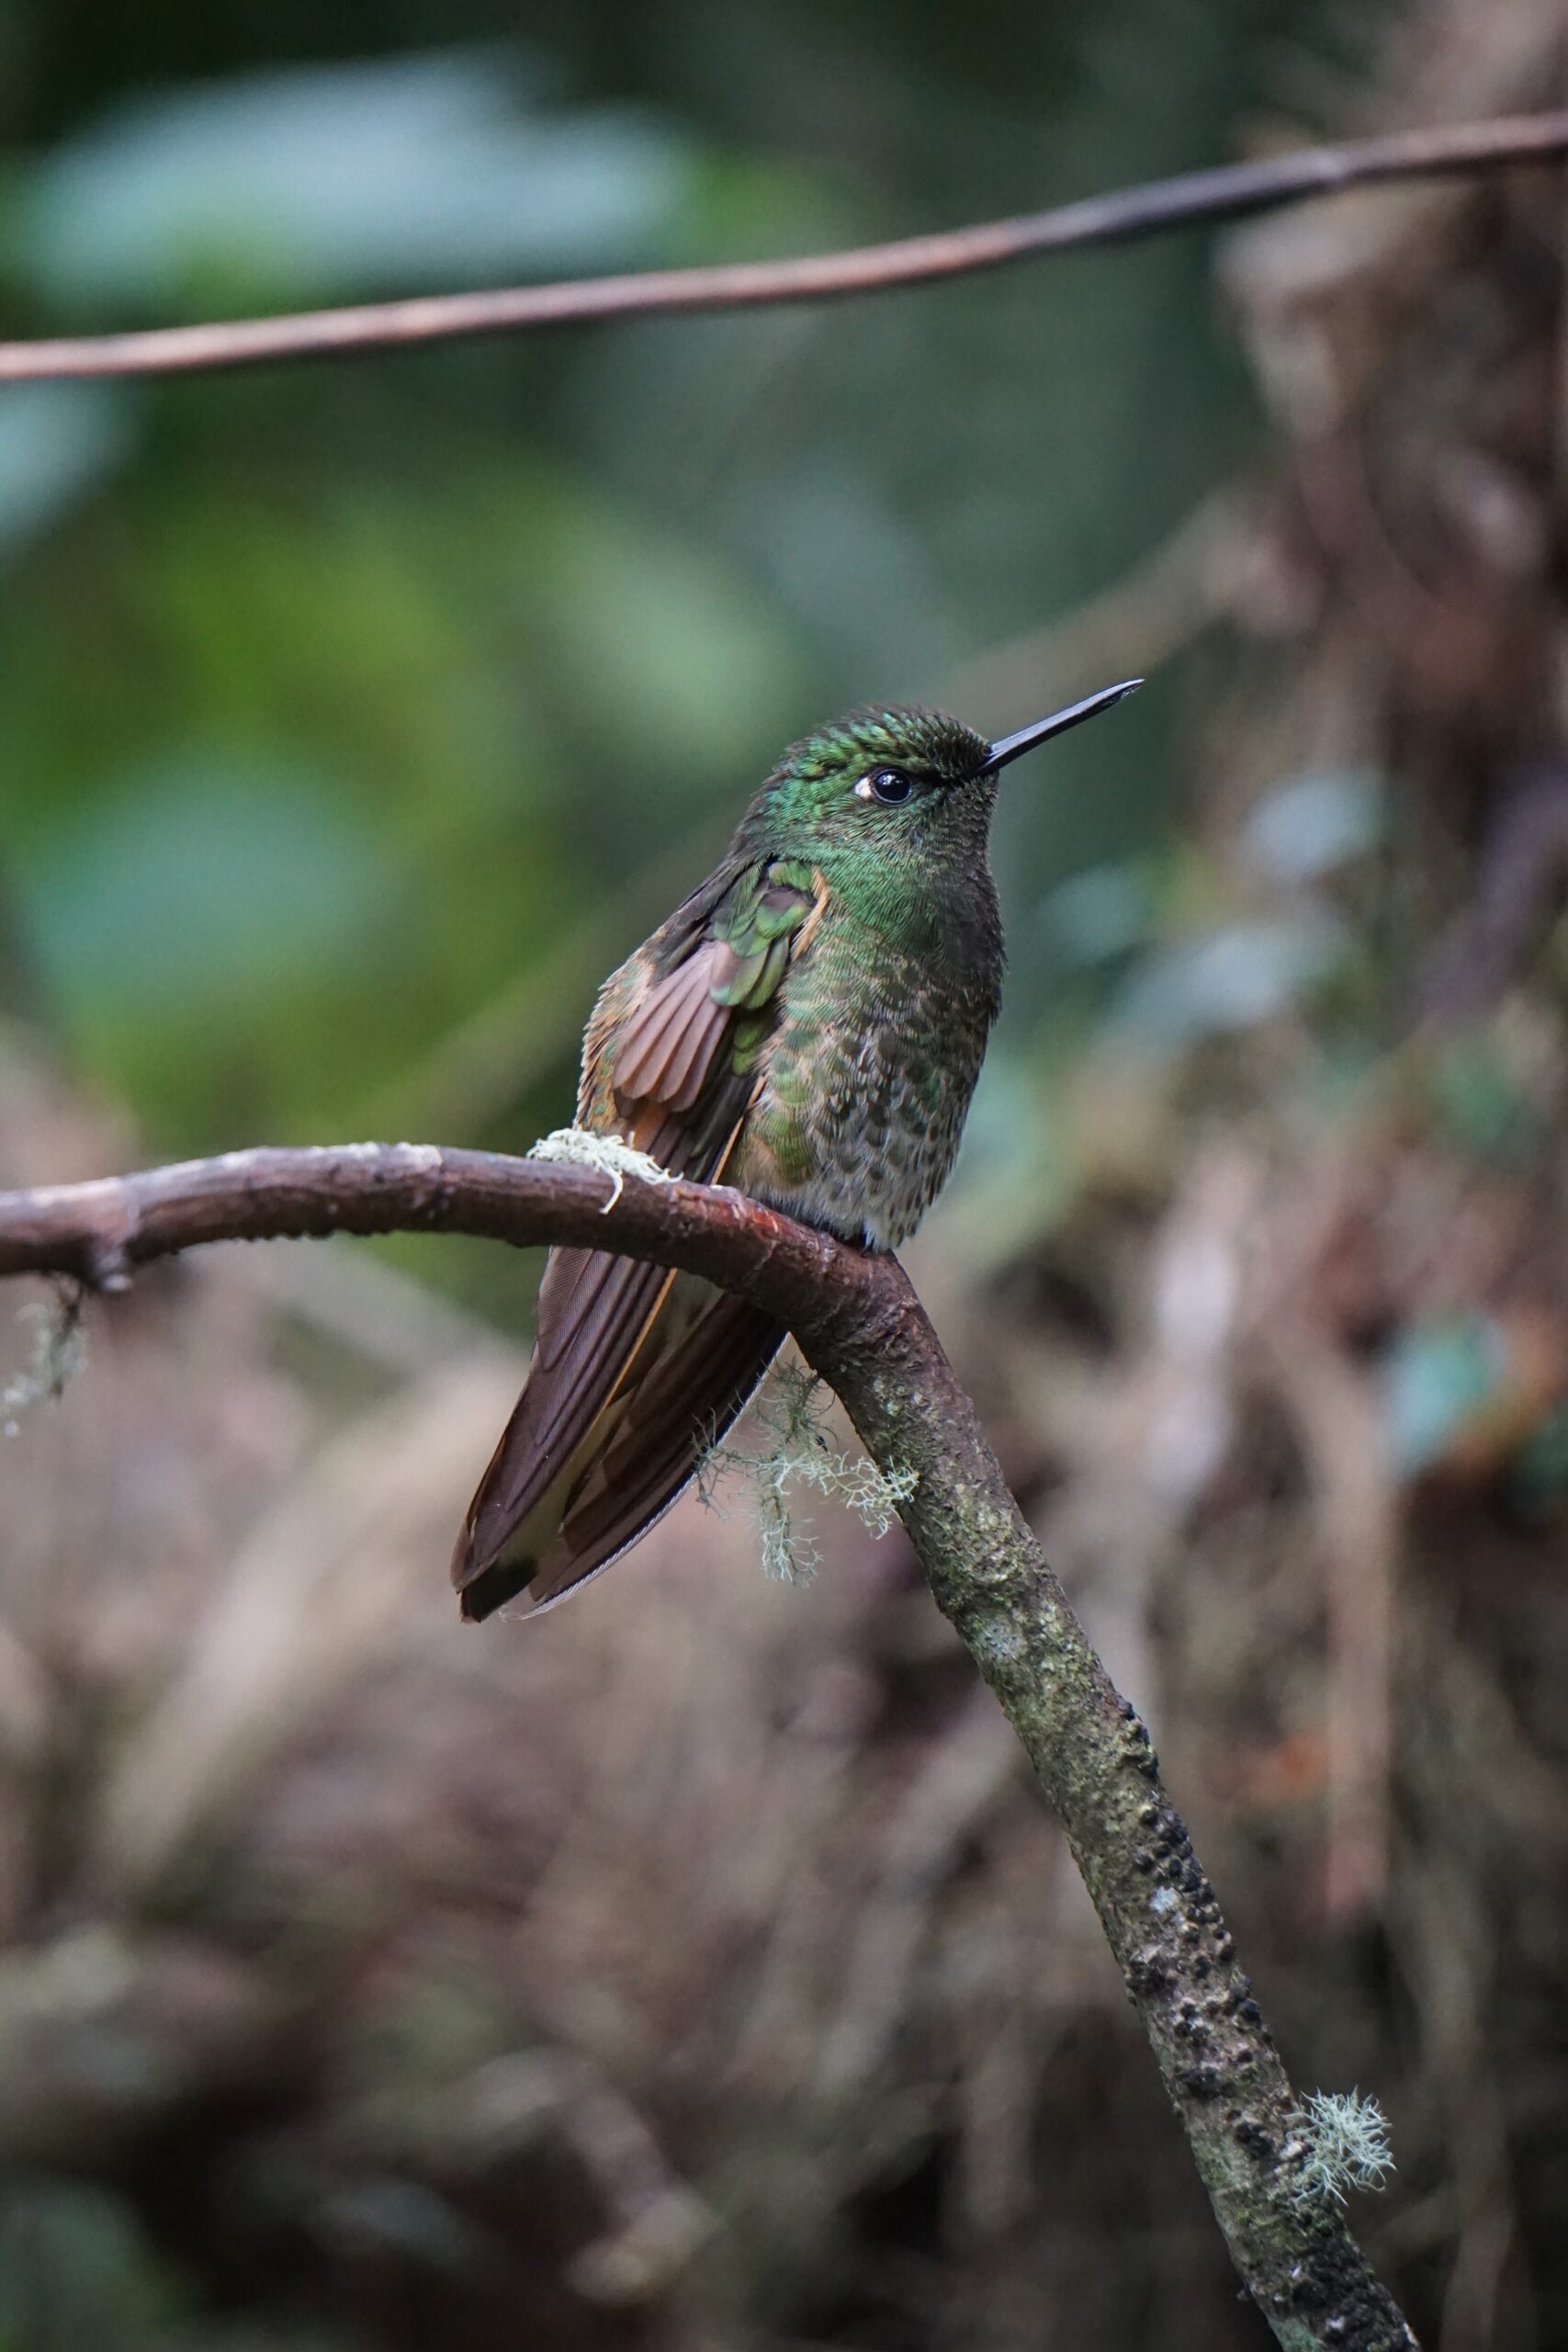 Hummingbird in forest. Photo by Cedric Fox.